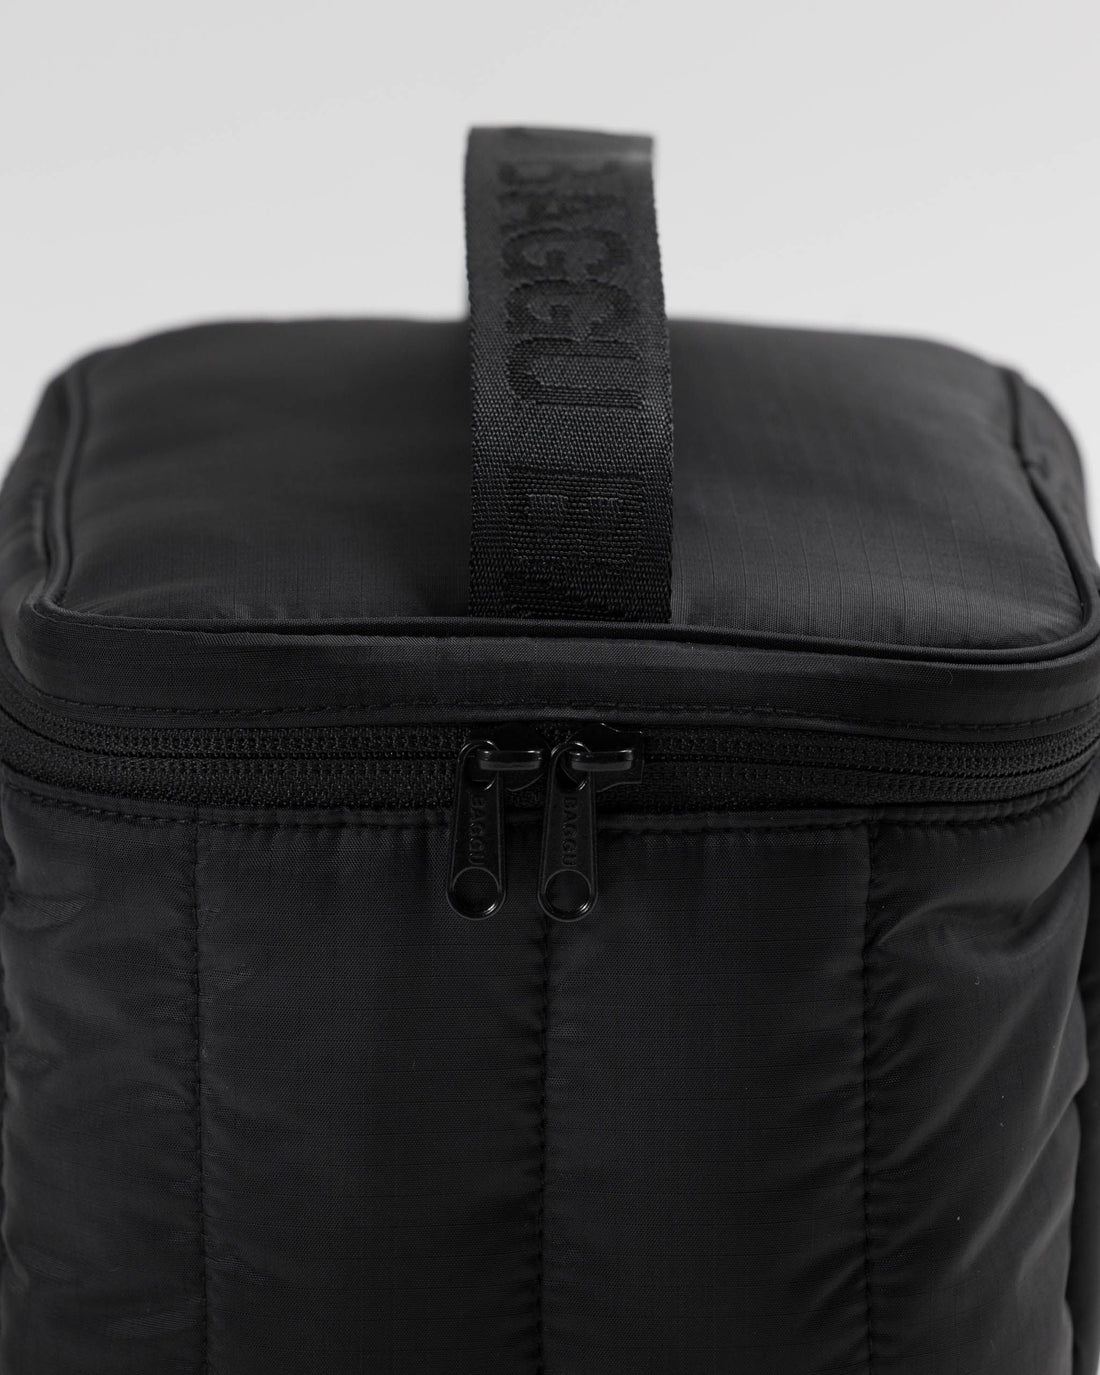 Puffy Insulated Lunch Bag | Black